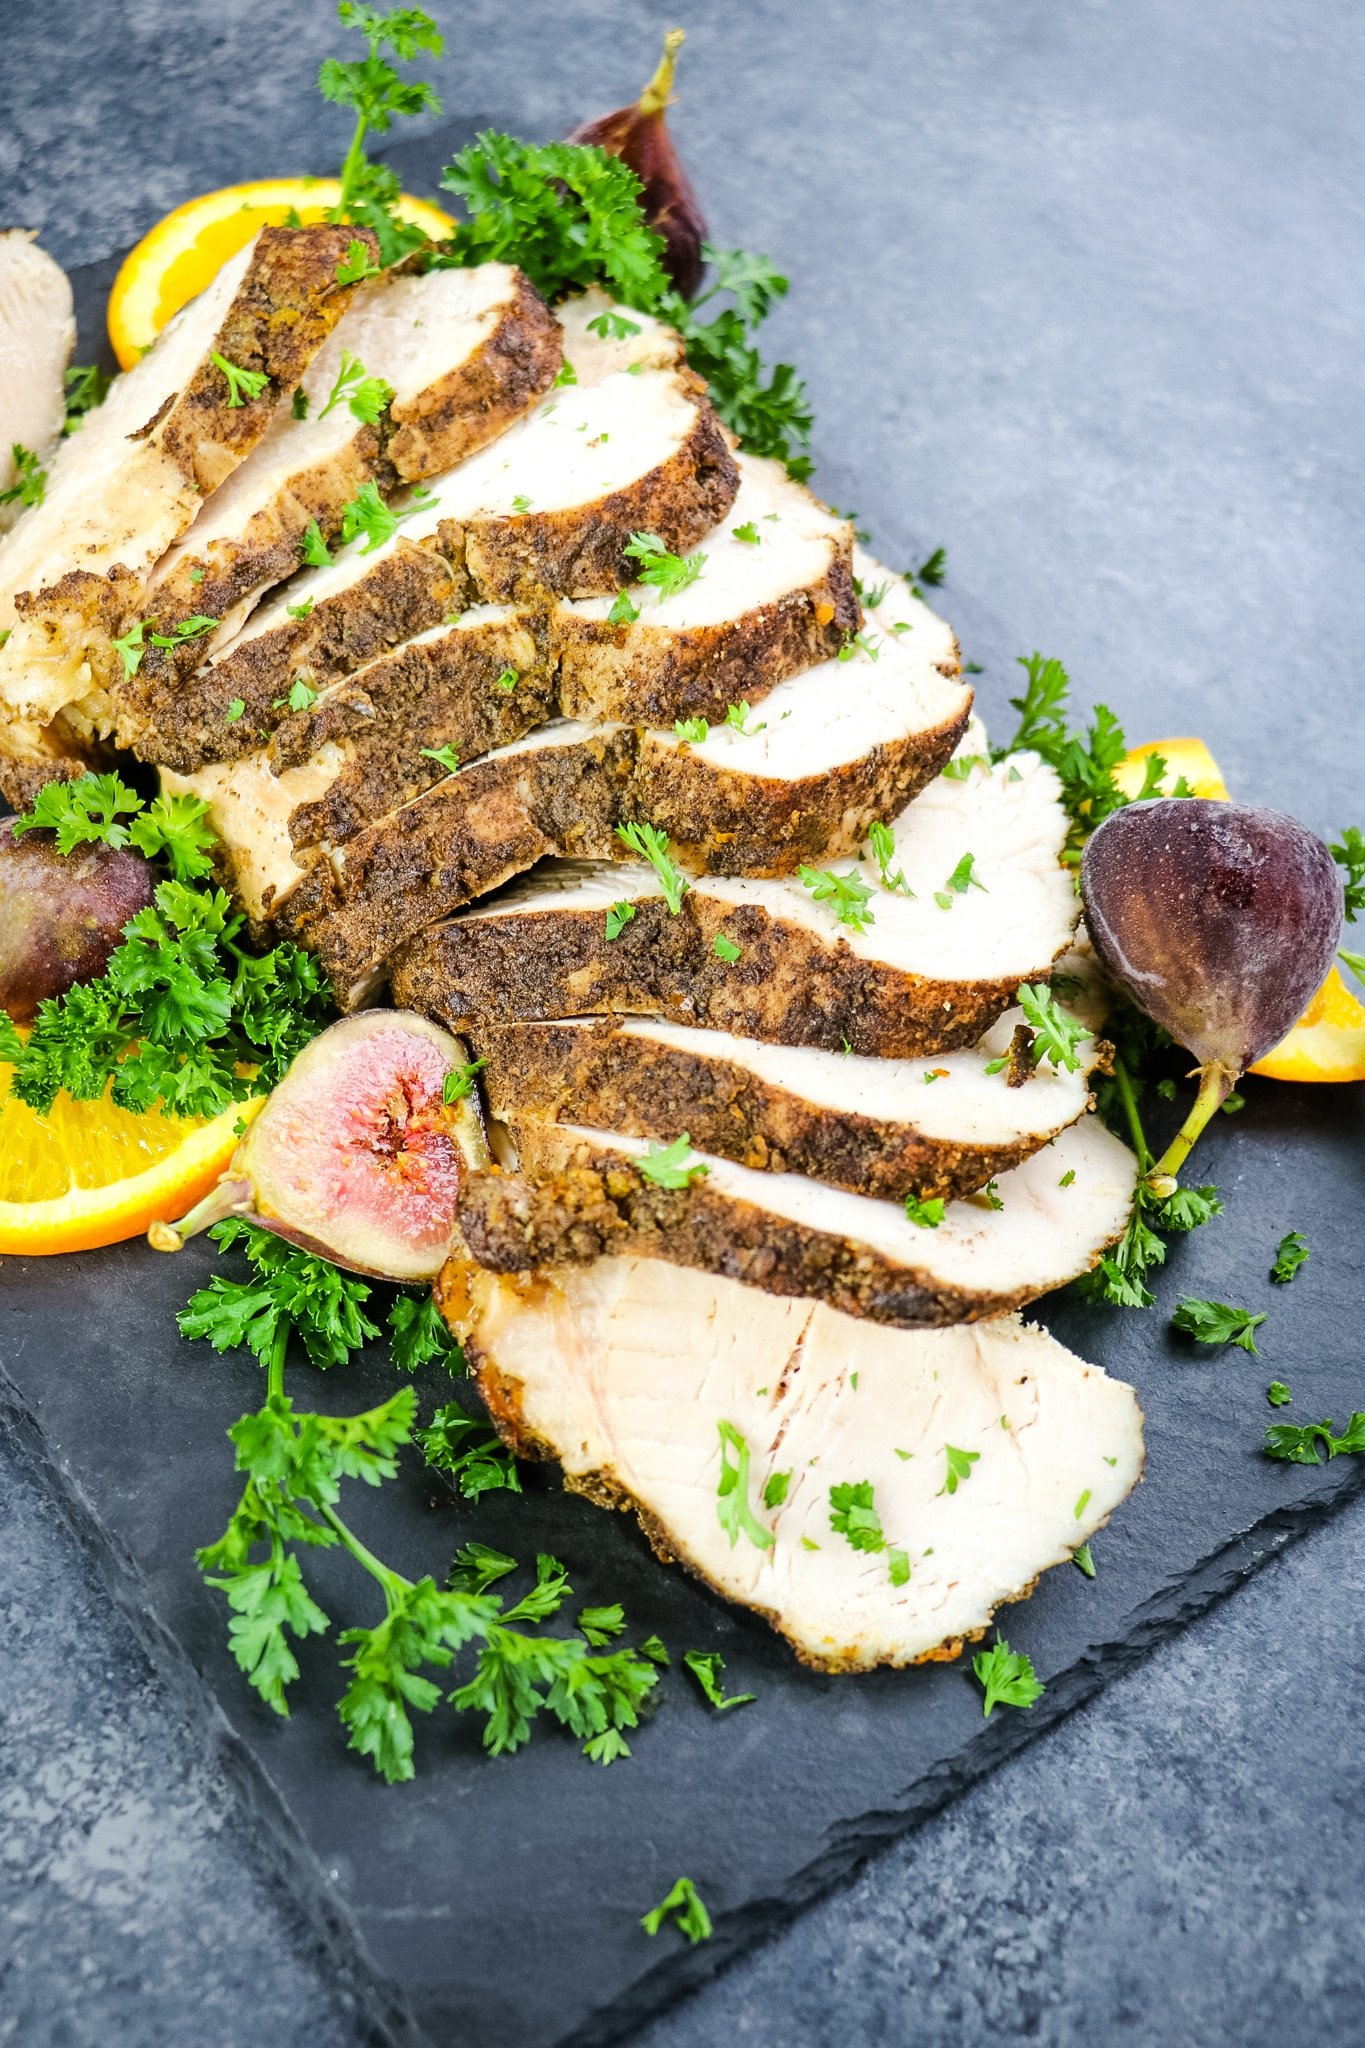 Slow cooker turkey breast recipe sliced and on platter.